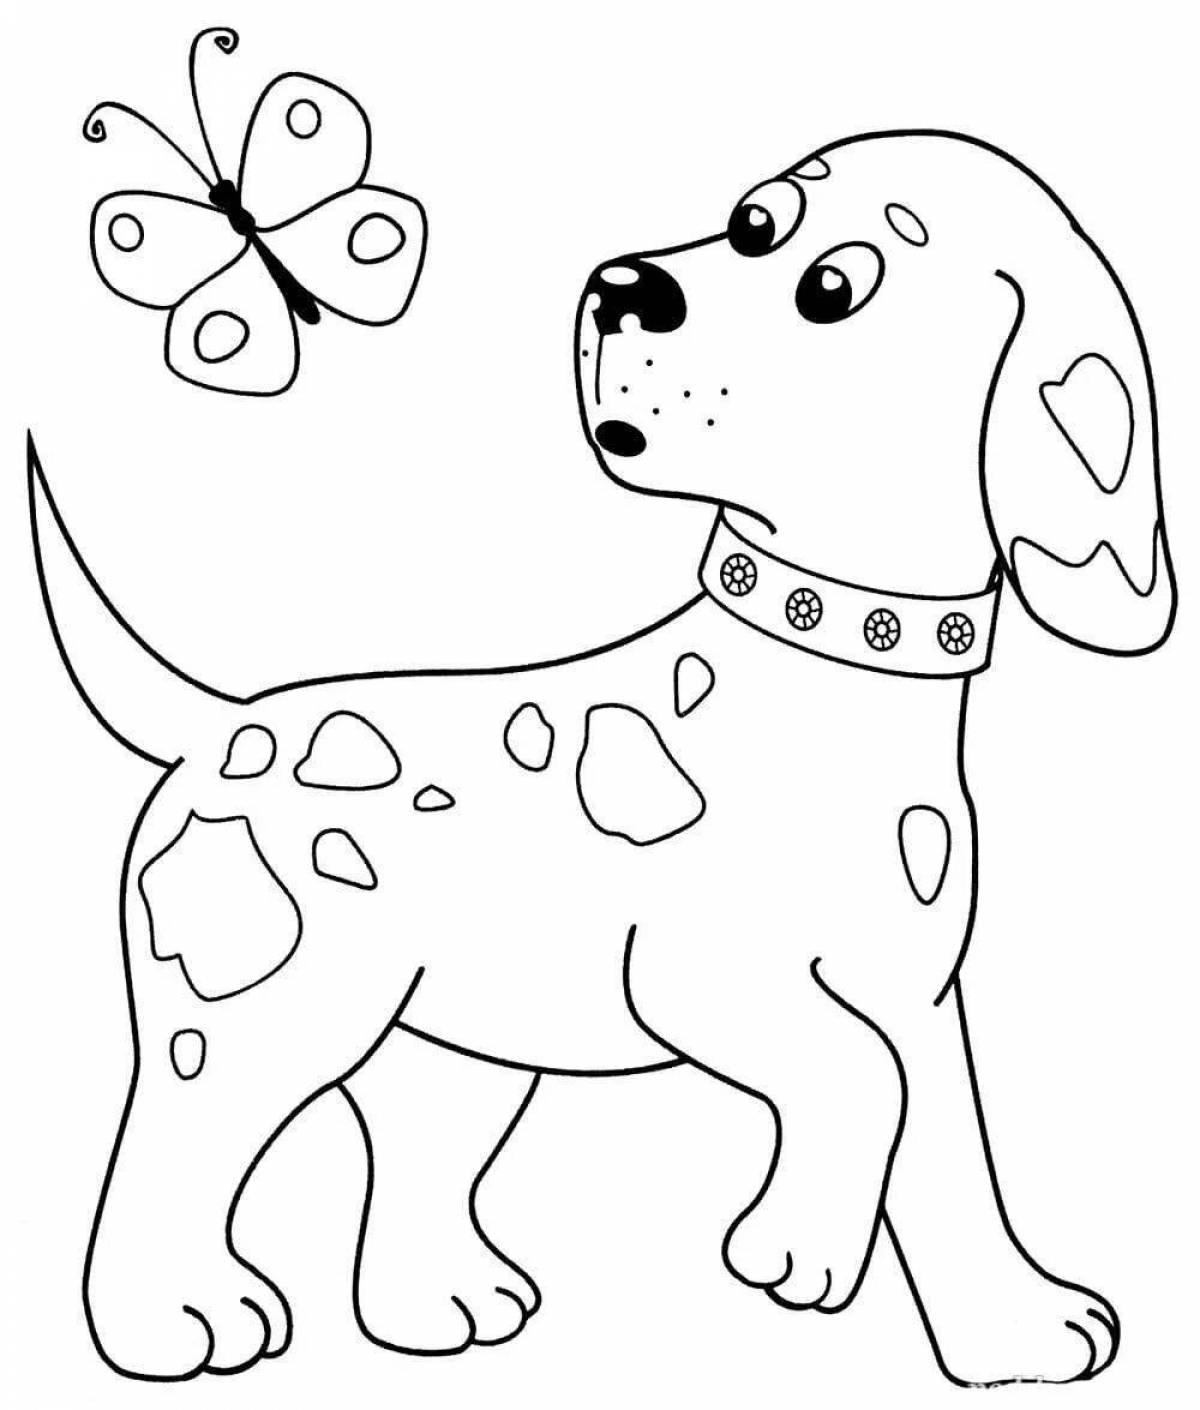 Wagging dog drawing